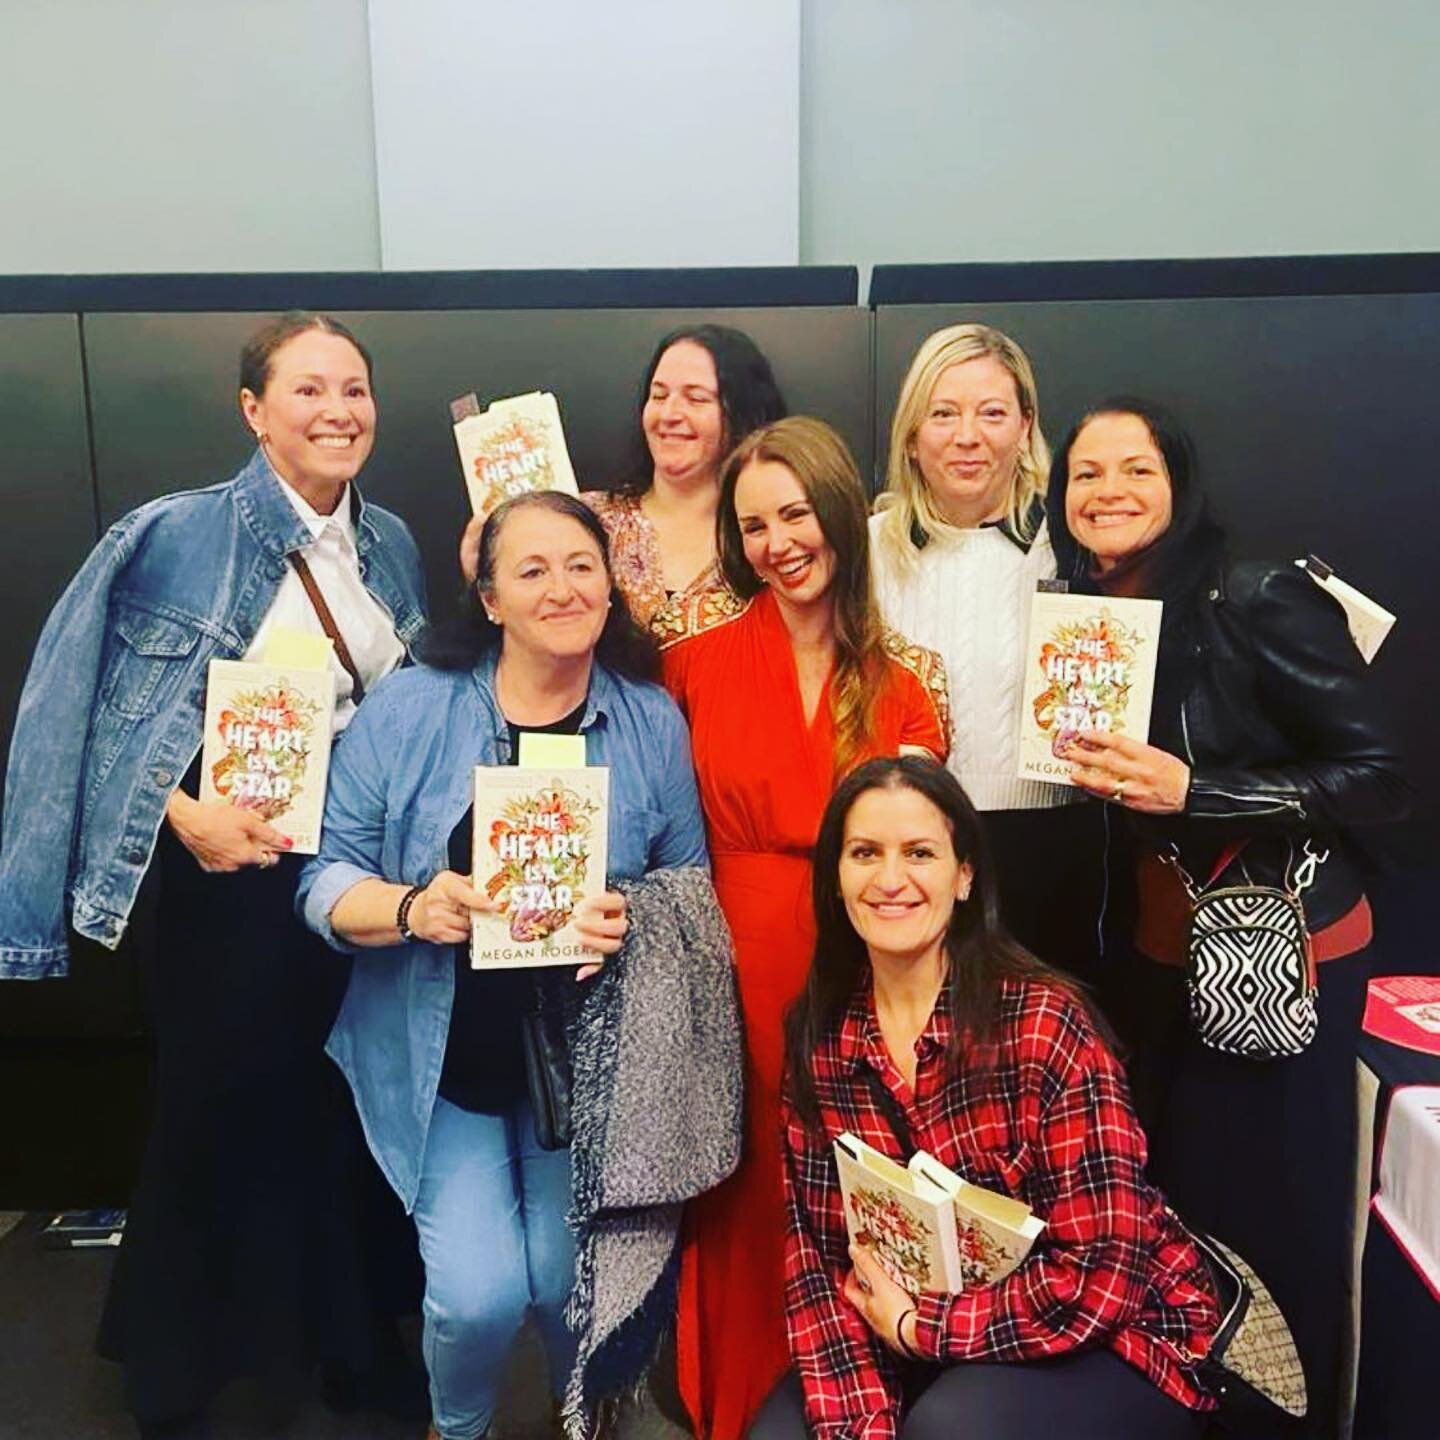 Shout out to these incredible women who I met at my launch! And who are meeting tonight to discuss The Heart is a Star at their bookclub 🥰

Thanks for the support ladies &hearts;️⭐️

#Repost @the.literary.ladies.bc
・・・
Any guesses as to this months 